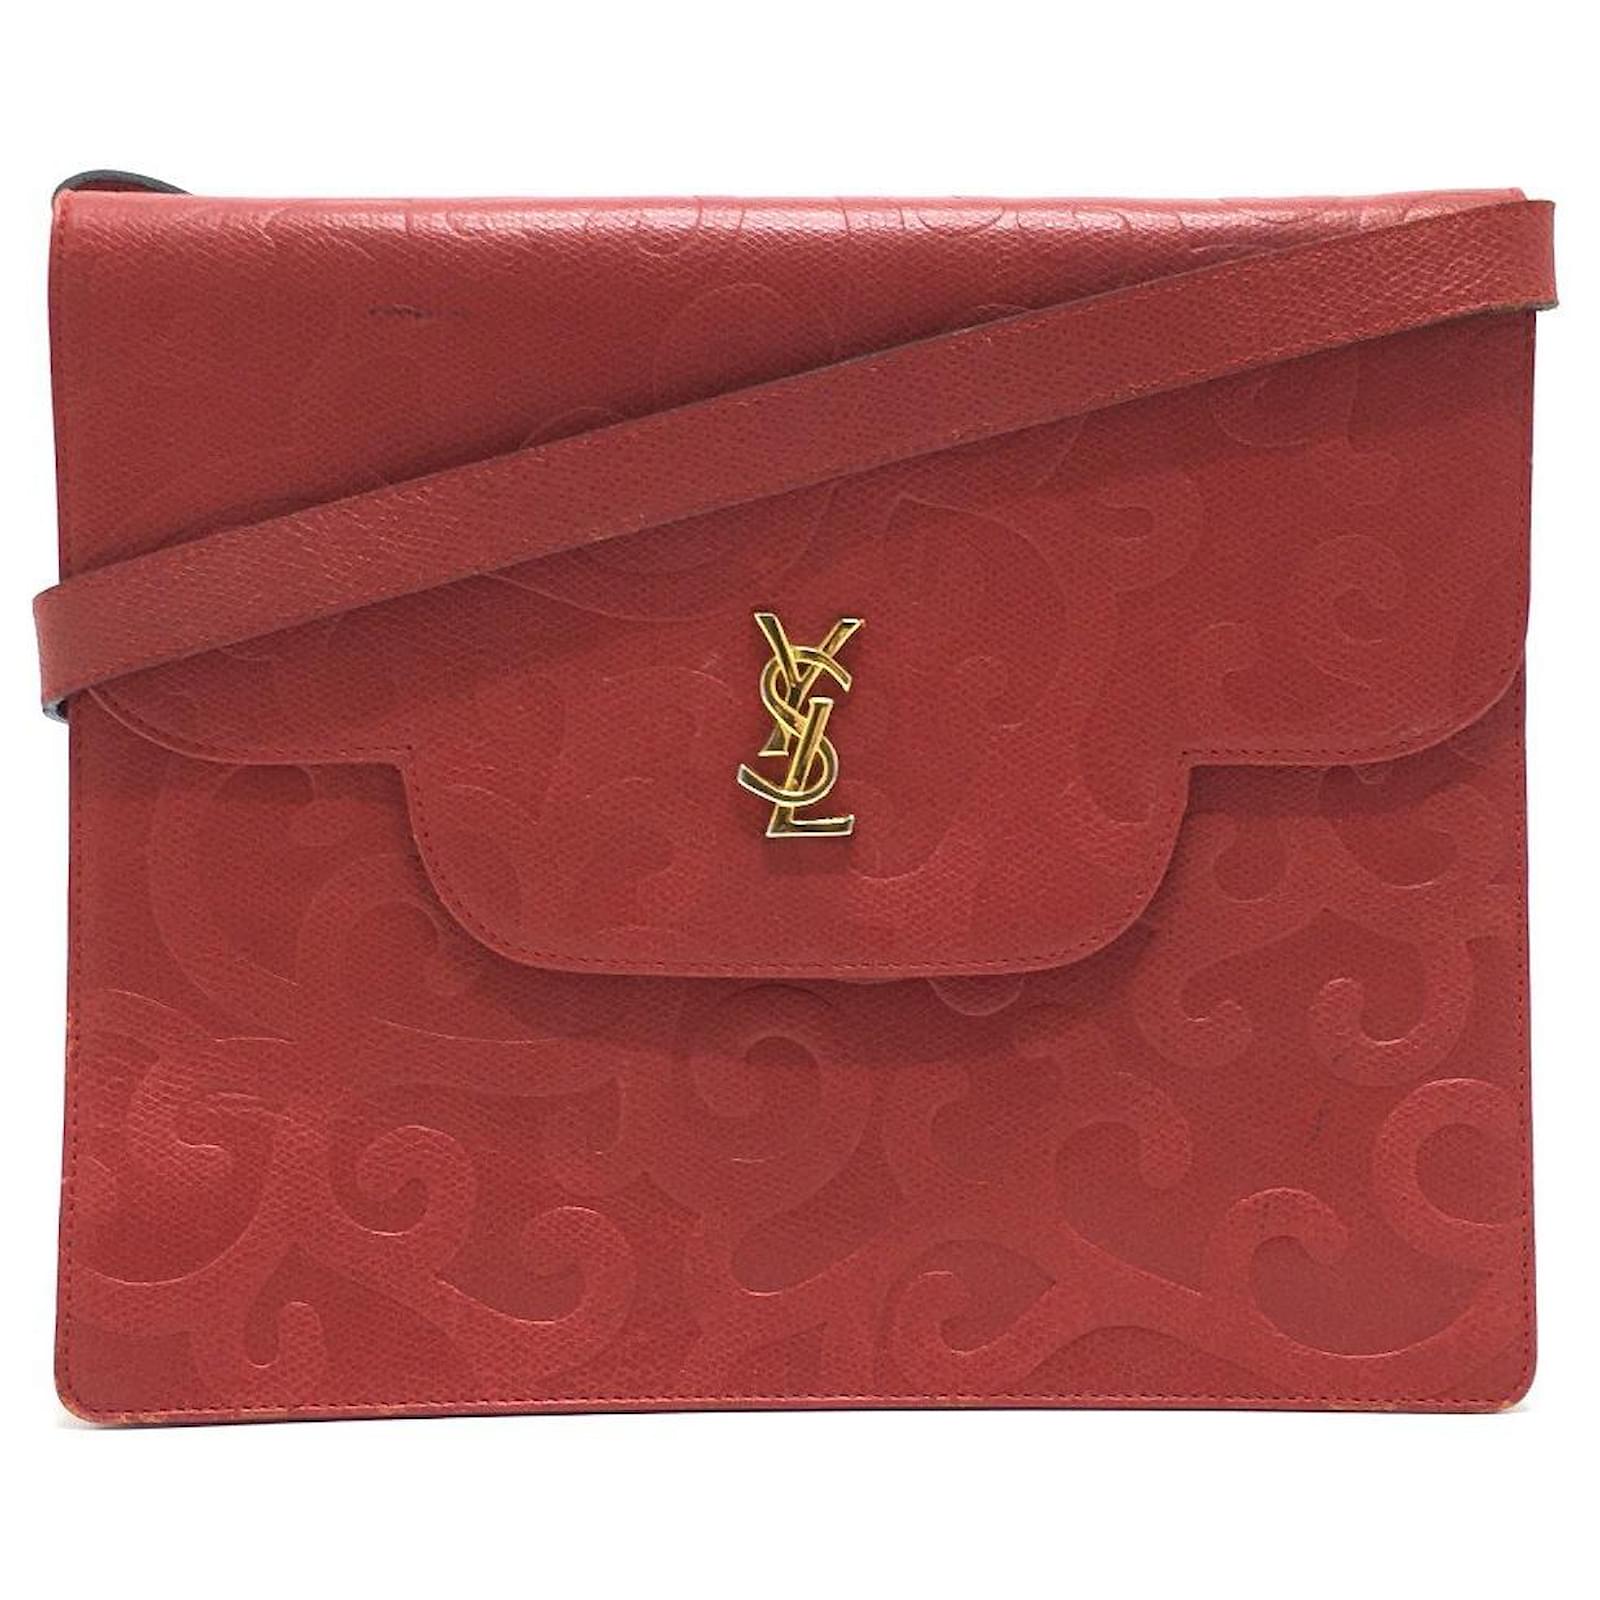 Louis Vuitton Pre-owned Women's Fabric Clutch Bag - Red - One Size